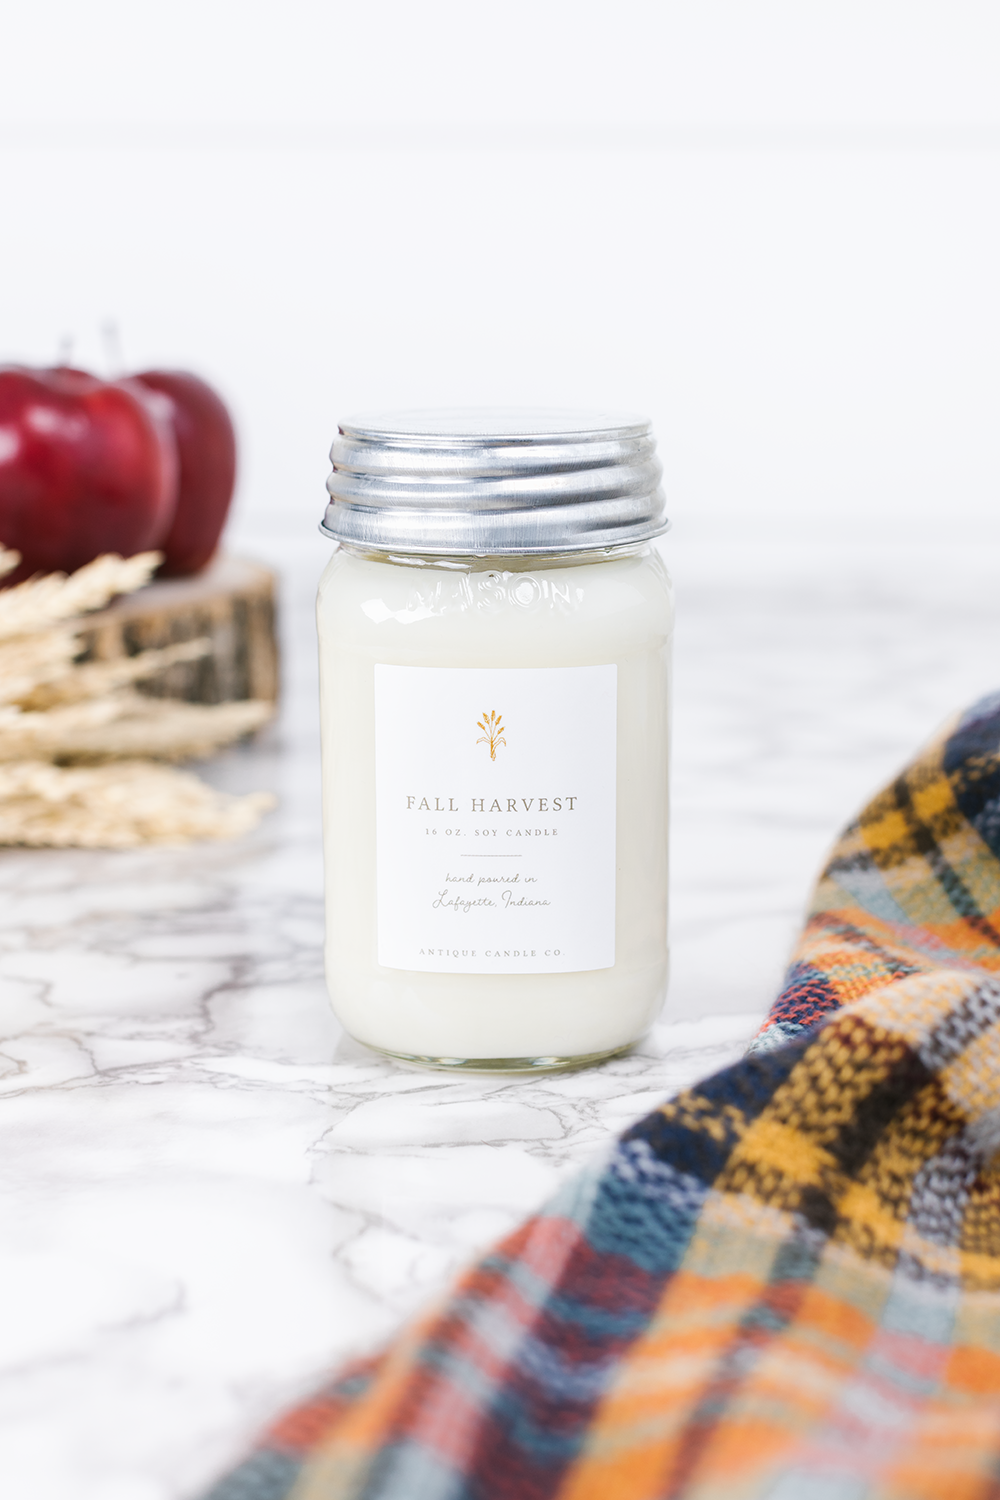 Fall Harvest 16oz Candle